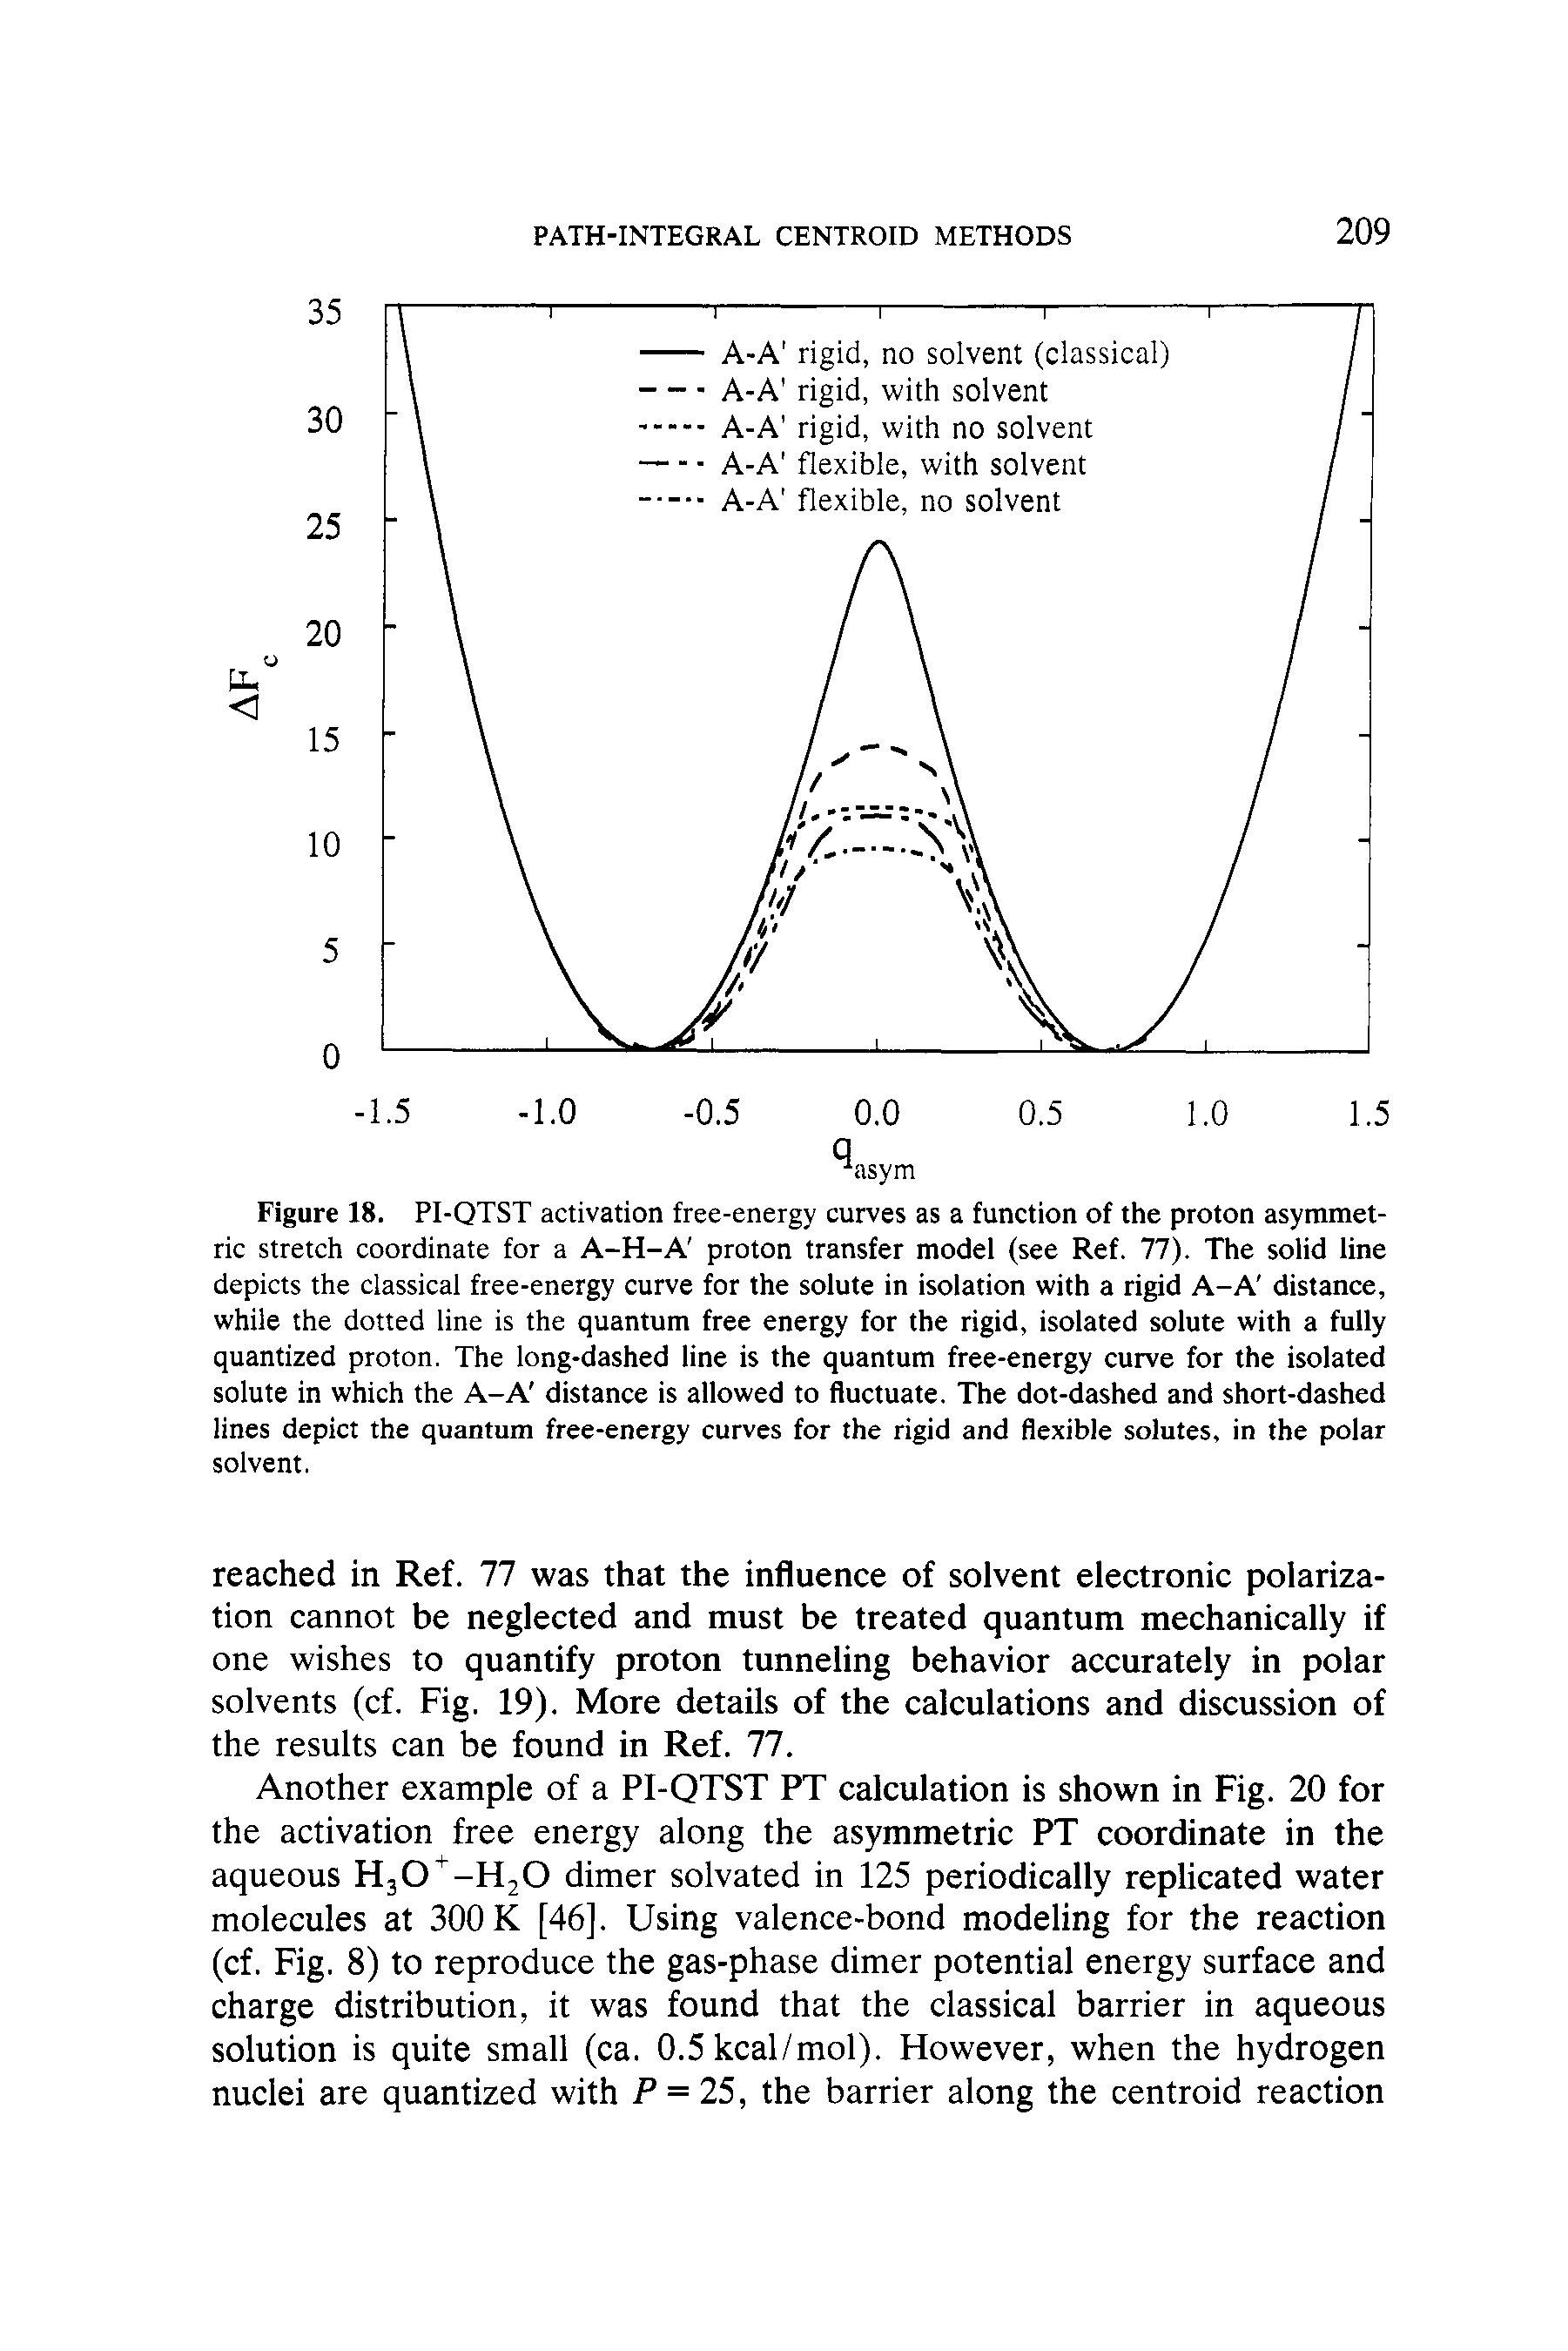 Figure 18. PI-QTST activation free-energy curves as a function of the proton asymmetric stretch coordinate for a A-H-A proton transfer model (see Ref. 77). The solid line depicts the classical free-energy curve for the solute in isolation with a rigid A-A distanee, while the dotted line is the quantum free energy for the rigid, isolated solute with a fully quantized proton. The long-dashed line is the quantum free-energy curve for the isolated solute in which the A-A distance is allowed to fluctuate. The dot-dashed and short-dashed lines depict the quantum free-energy curves for the rigid and flexible solutes, in the polar solvent.